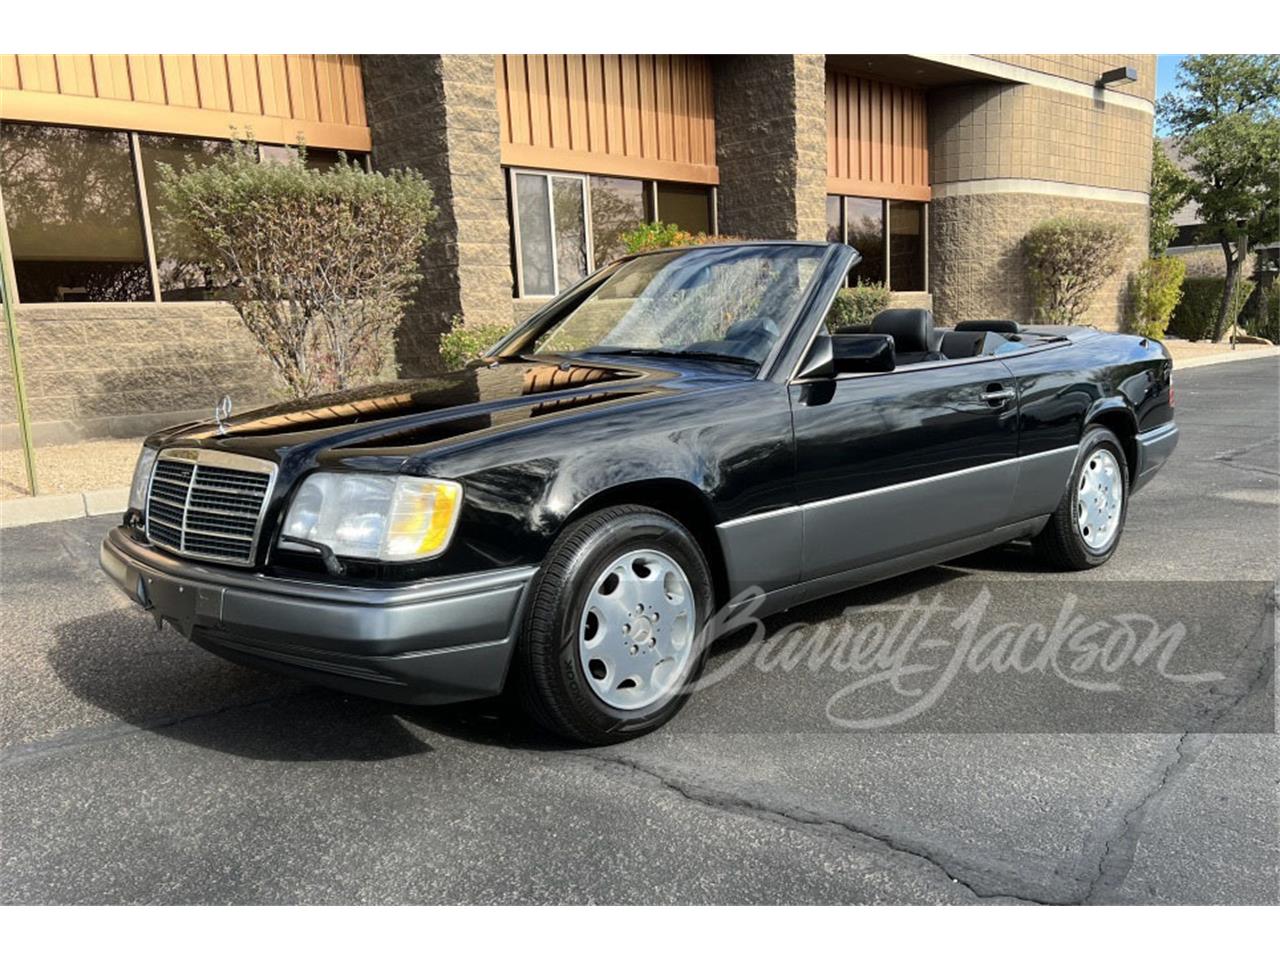 For Sale at Auction: 1995 Mercedes-Benz E320 in Scottsdale, Arizona for sale in Scottsdale, AZ